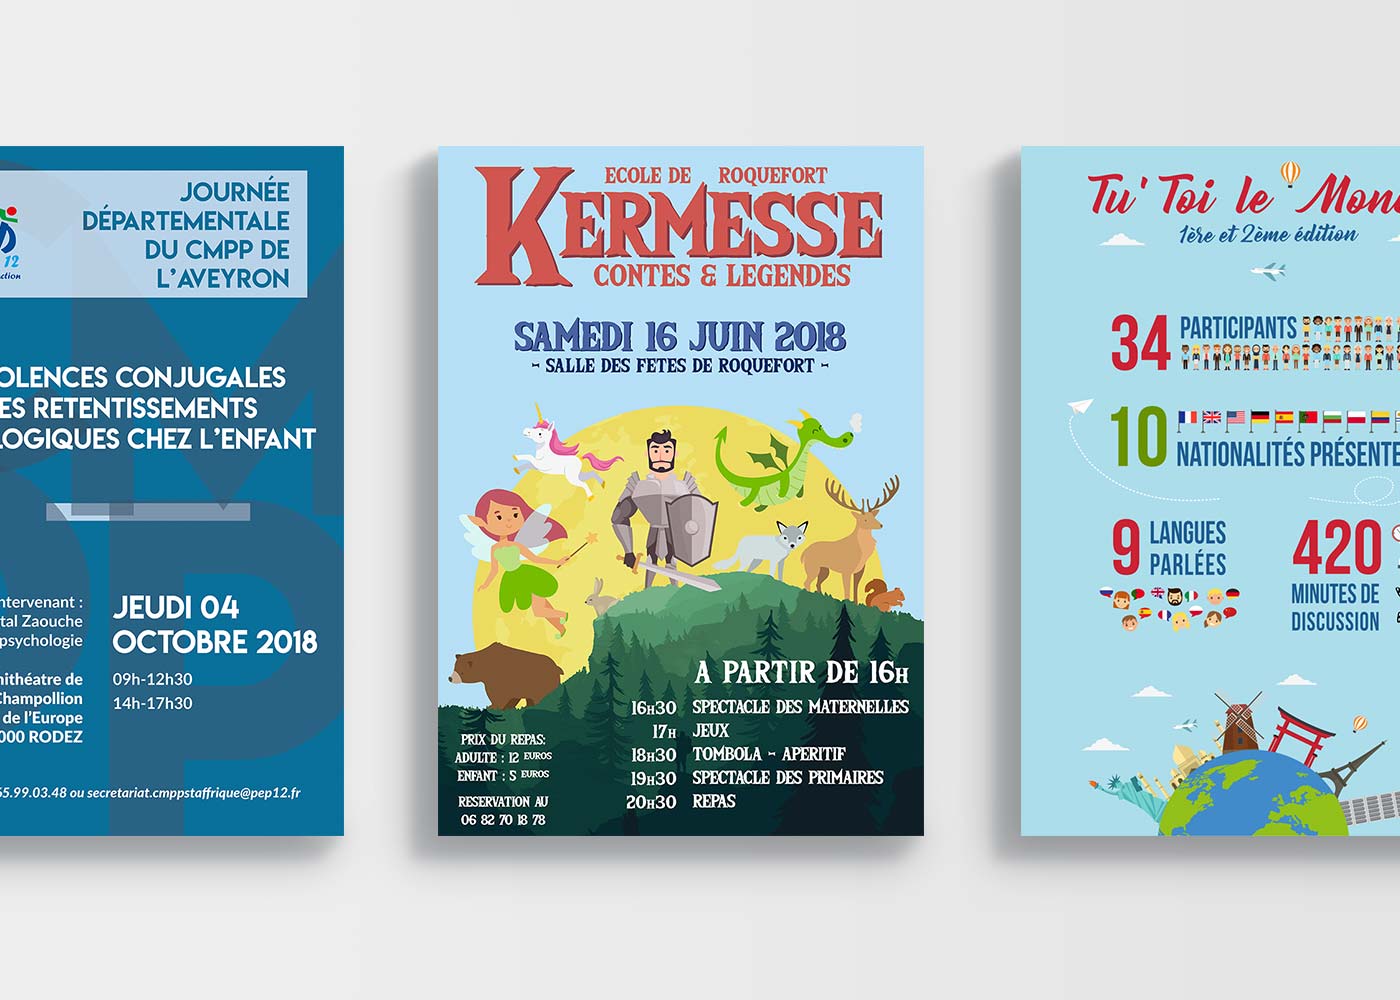 Affiches & infographies